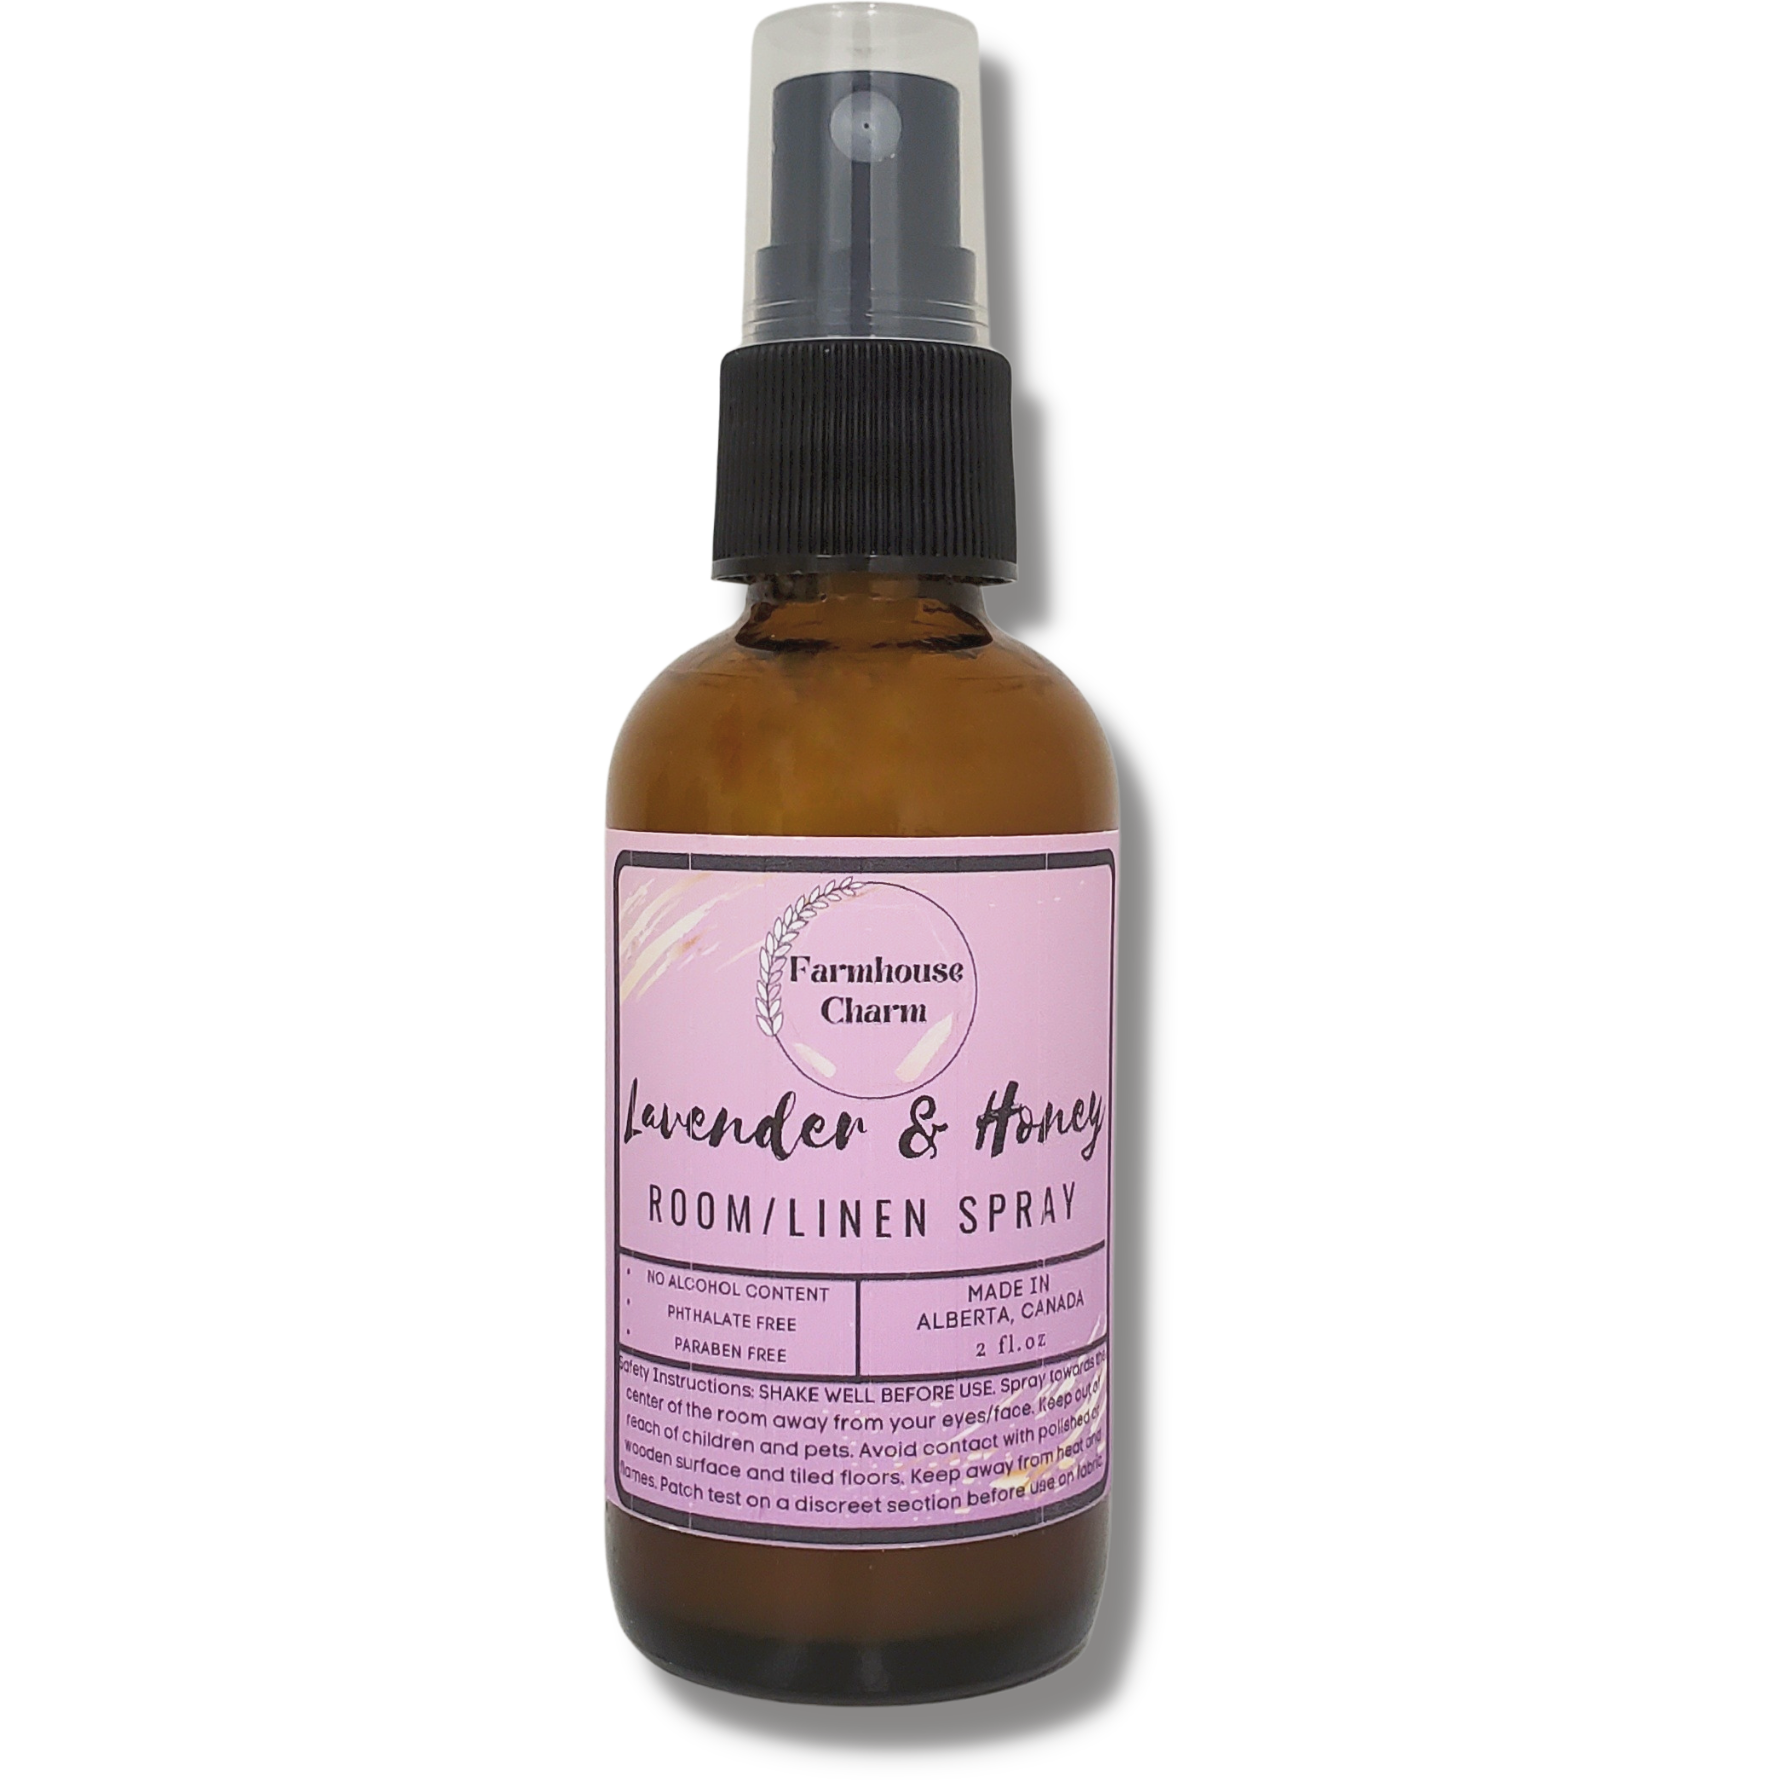 Lavender & Honey Room and Linen Spray- Farmhouse Charm  is an in-house blend of soft lavender & woody fragrance that intertwines with fresh fern, sweet honey & warm sandalwood.  Lavender & Honey Room and Linen Spray- Farmhouse Charm  Net Weight: 2 oz No Alcohol Content Phthalate free Paraben free